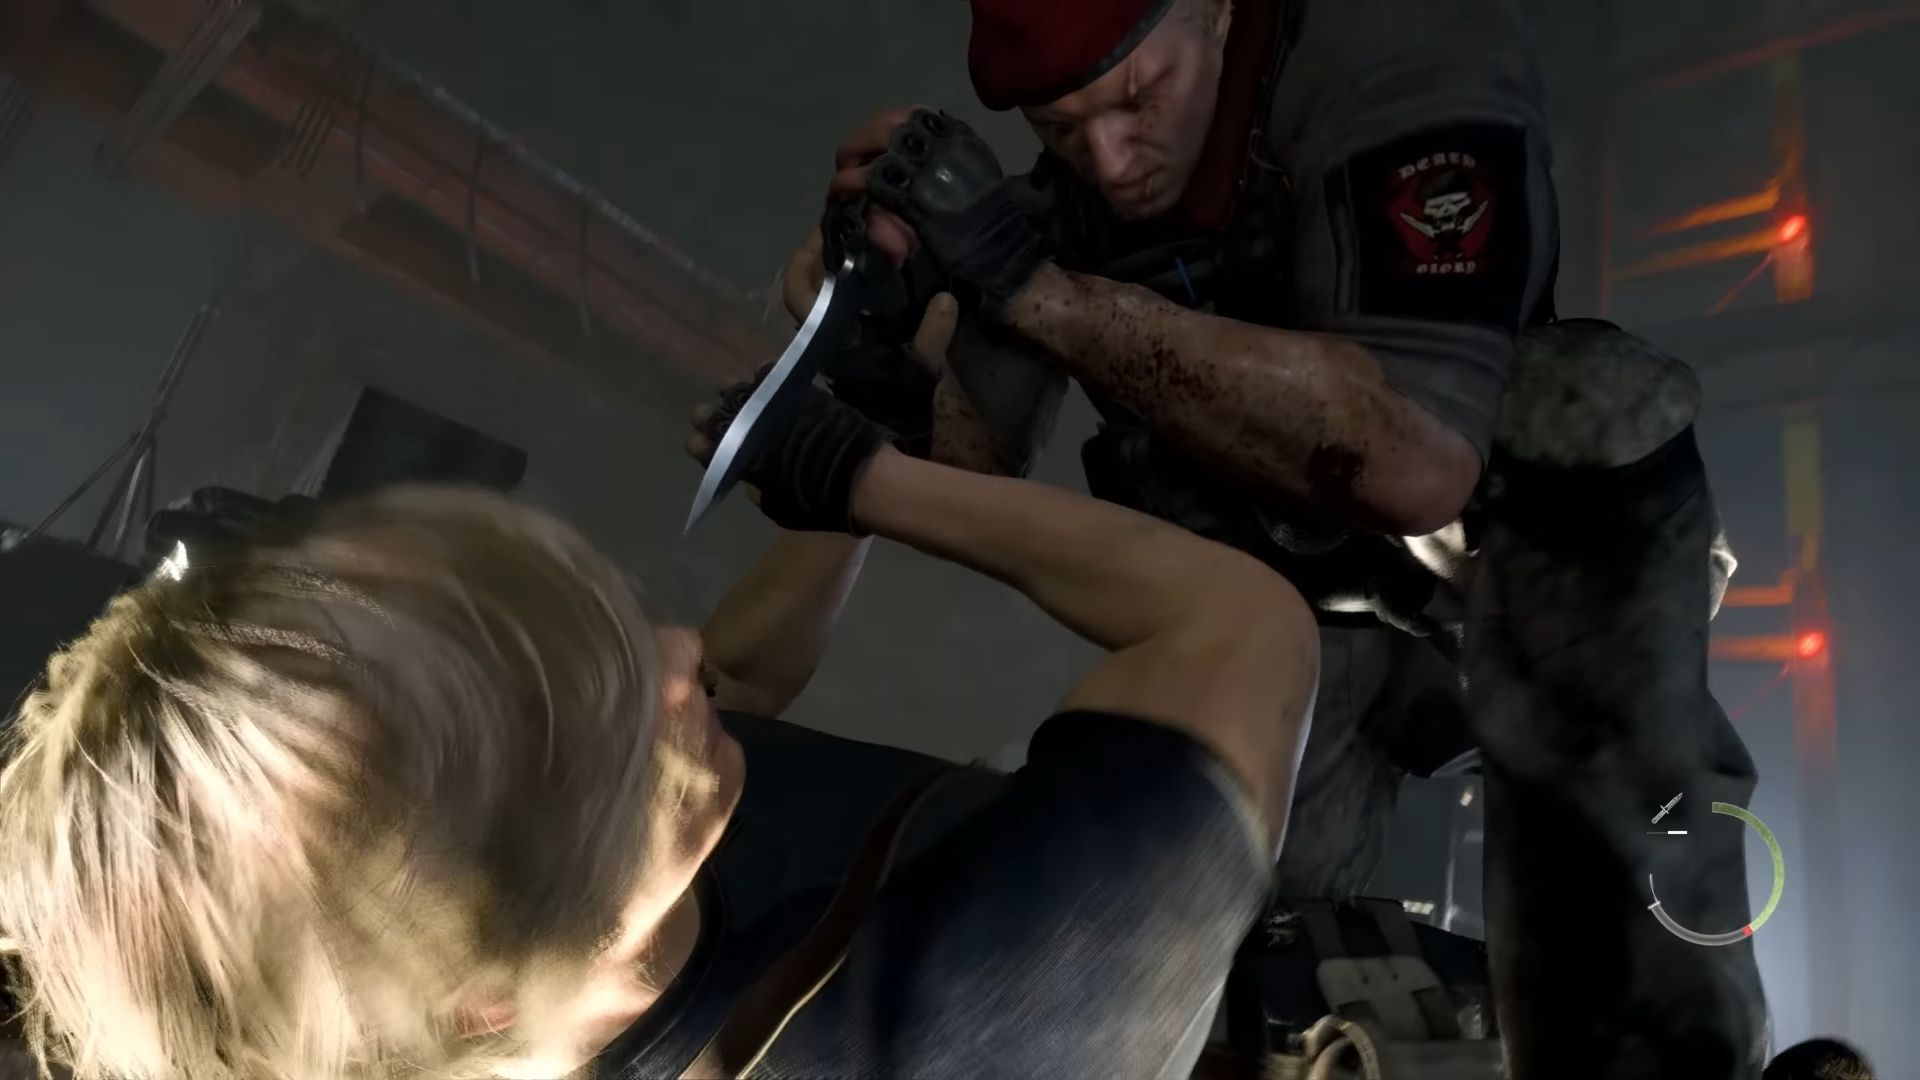 Krauser stabbing his knife down at Leon, who is holding it off, in Resident Evil 4 Remake.